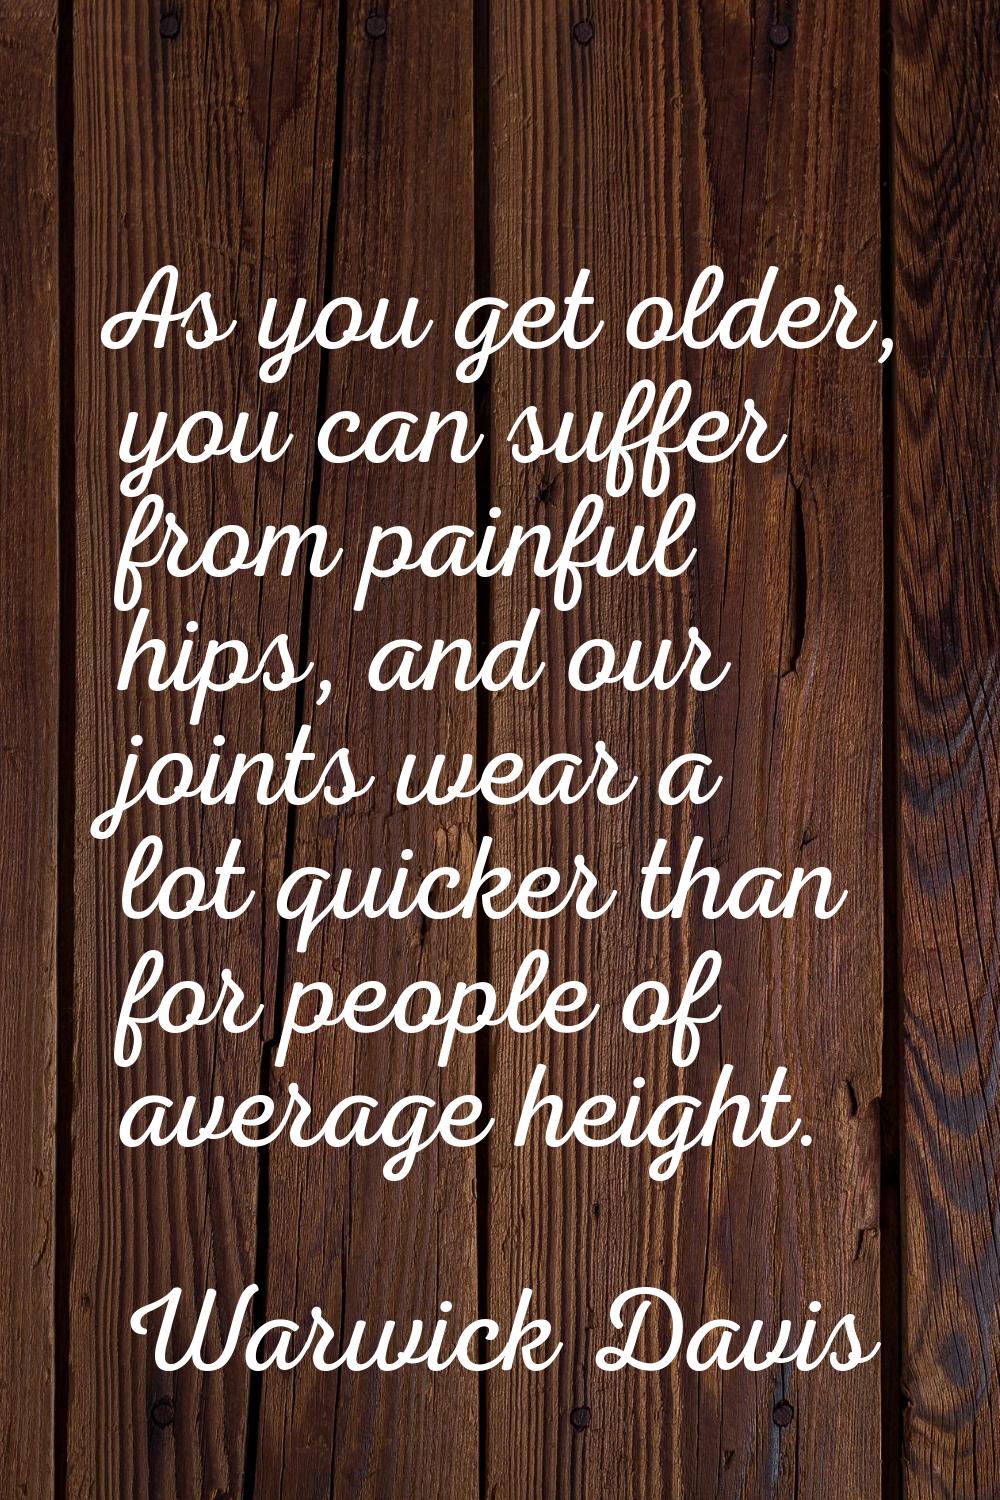 As you get older, you can suffer from painful hips, and our joints wear a lot quicker than for peop